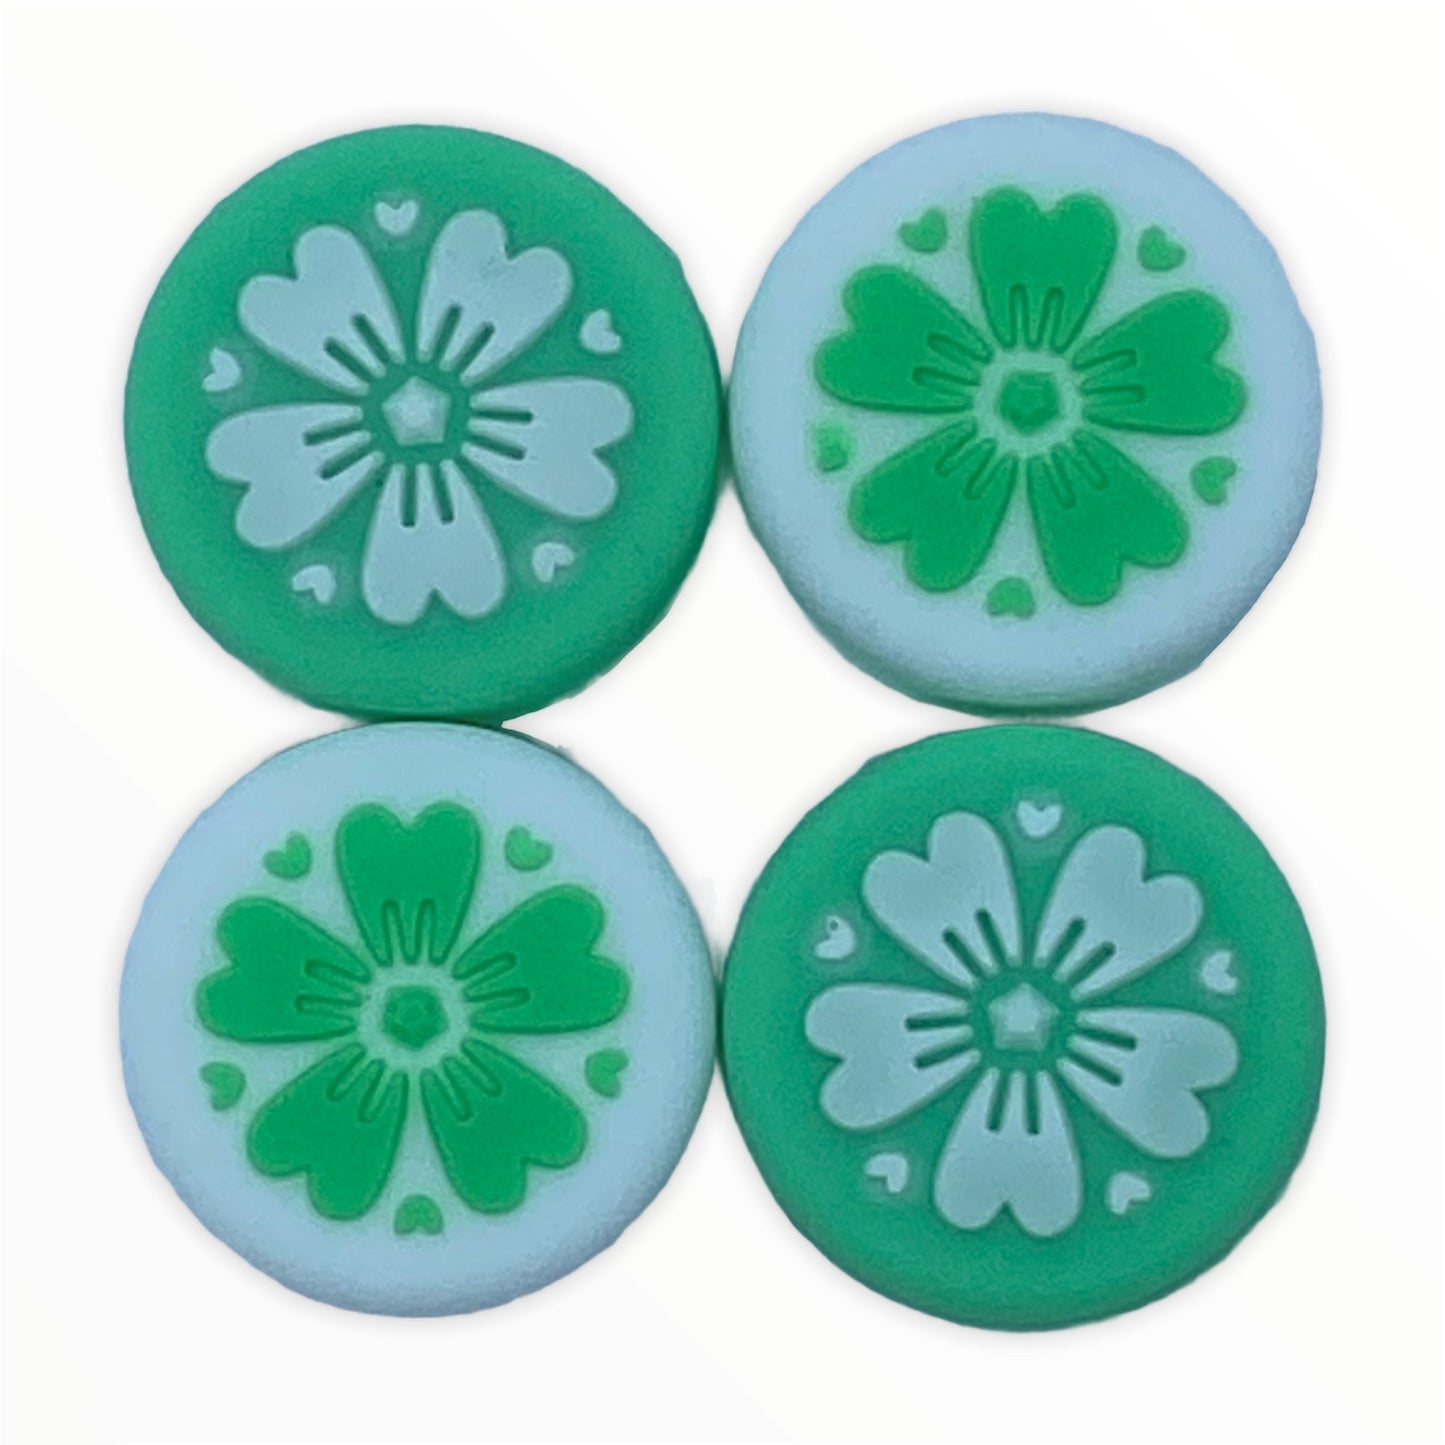 JenDore Green & White 4Pcs Flowers Silicone Thumb Grip Caps for Nintendo Switch